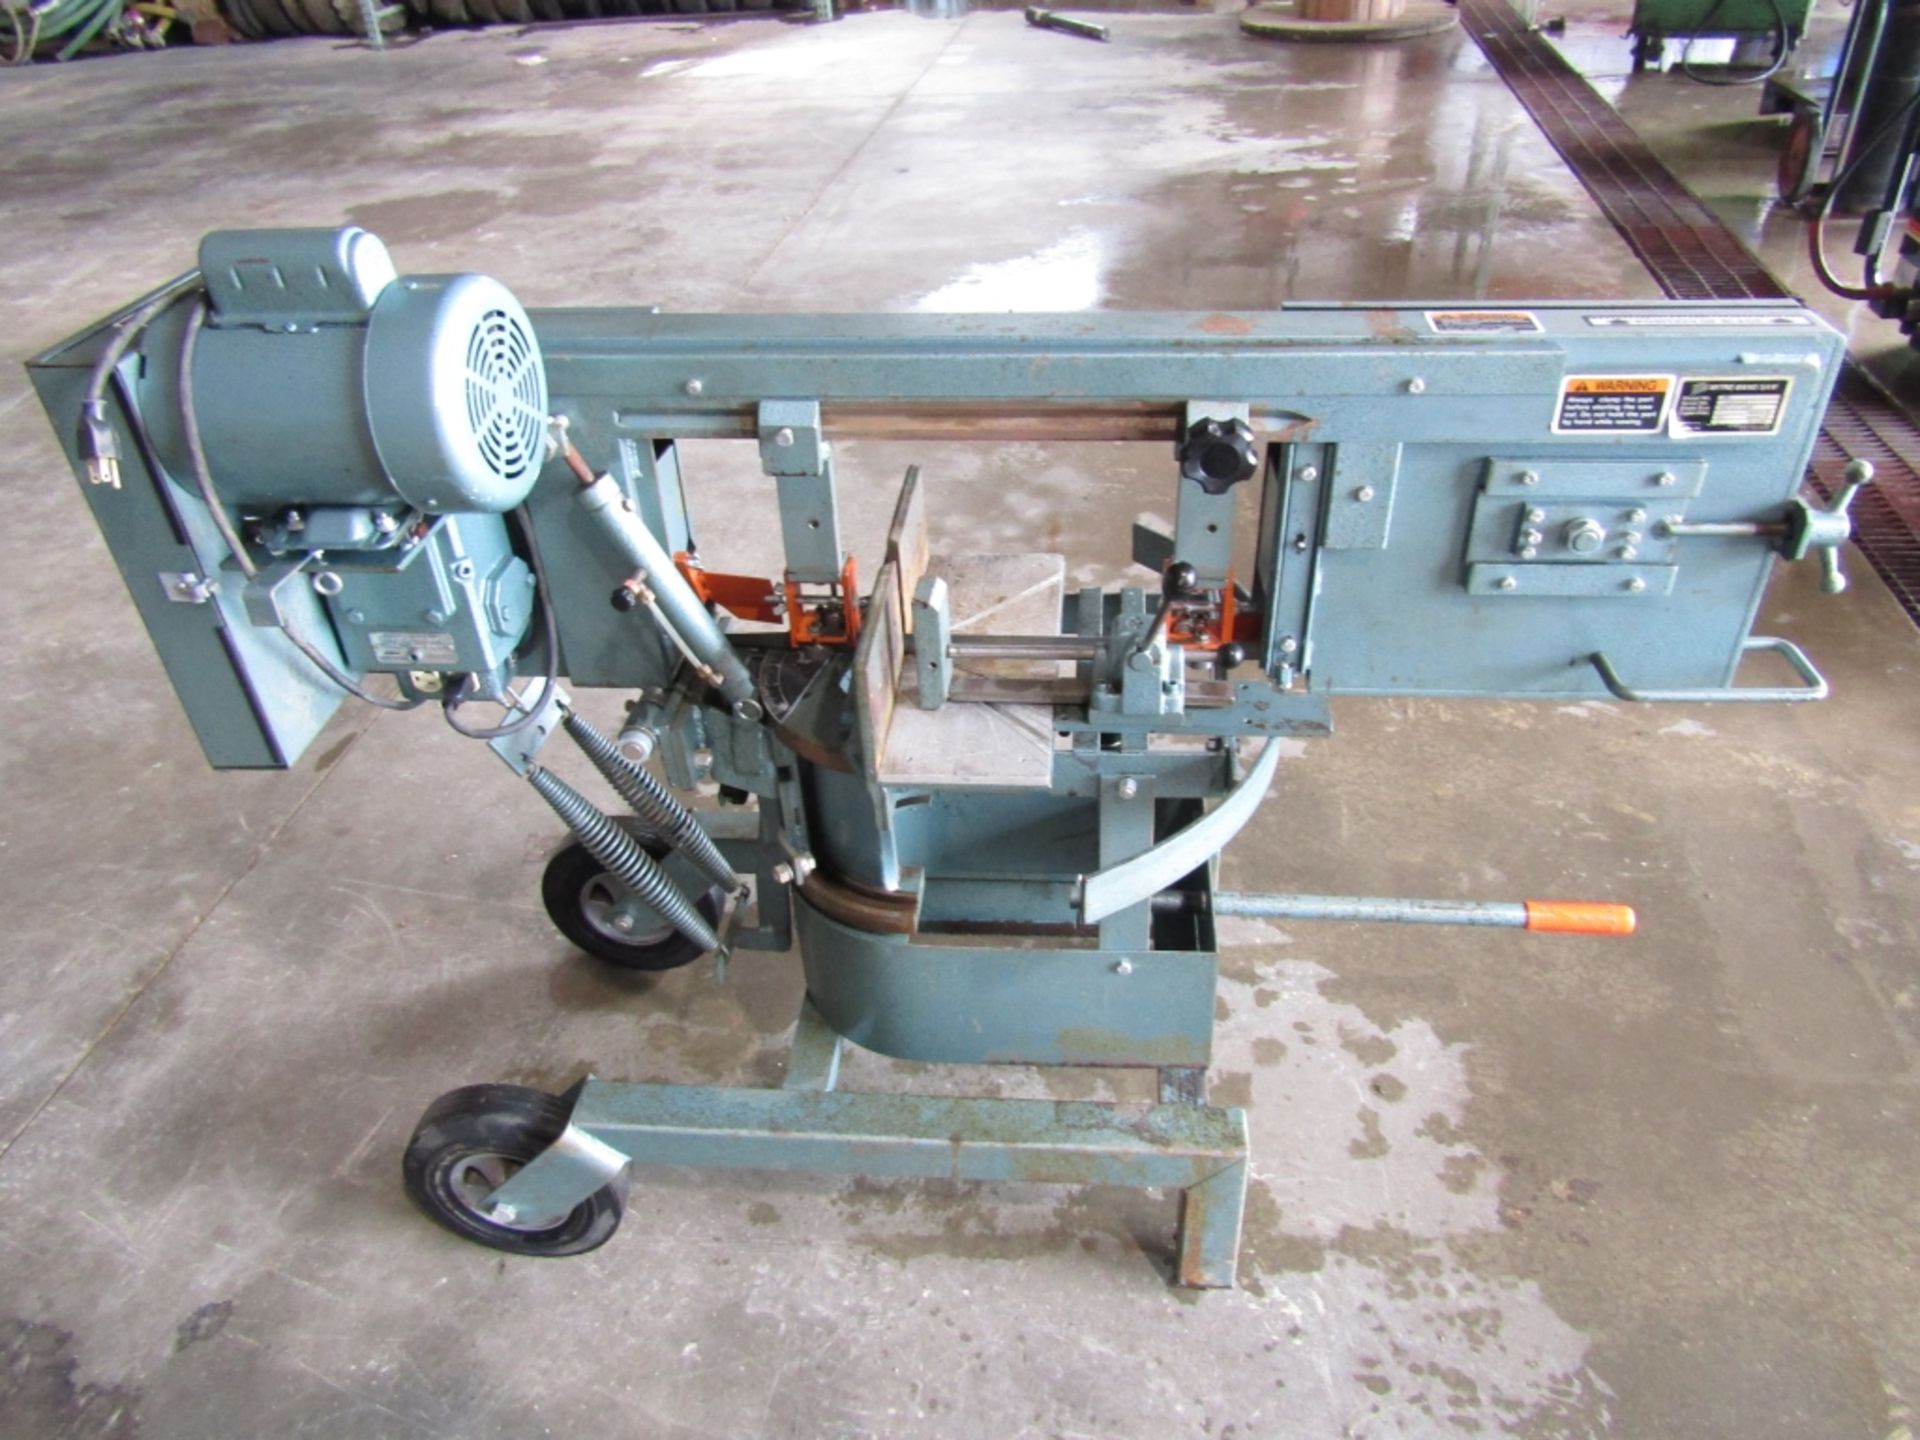 Ellis Mitre Band Saw, Model # 1600, Serial # 16007320, Blade Size 10" x 1" x .035, Cuts 7" @ 45 - Image 2 of 4